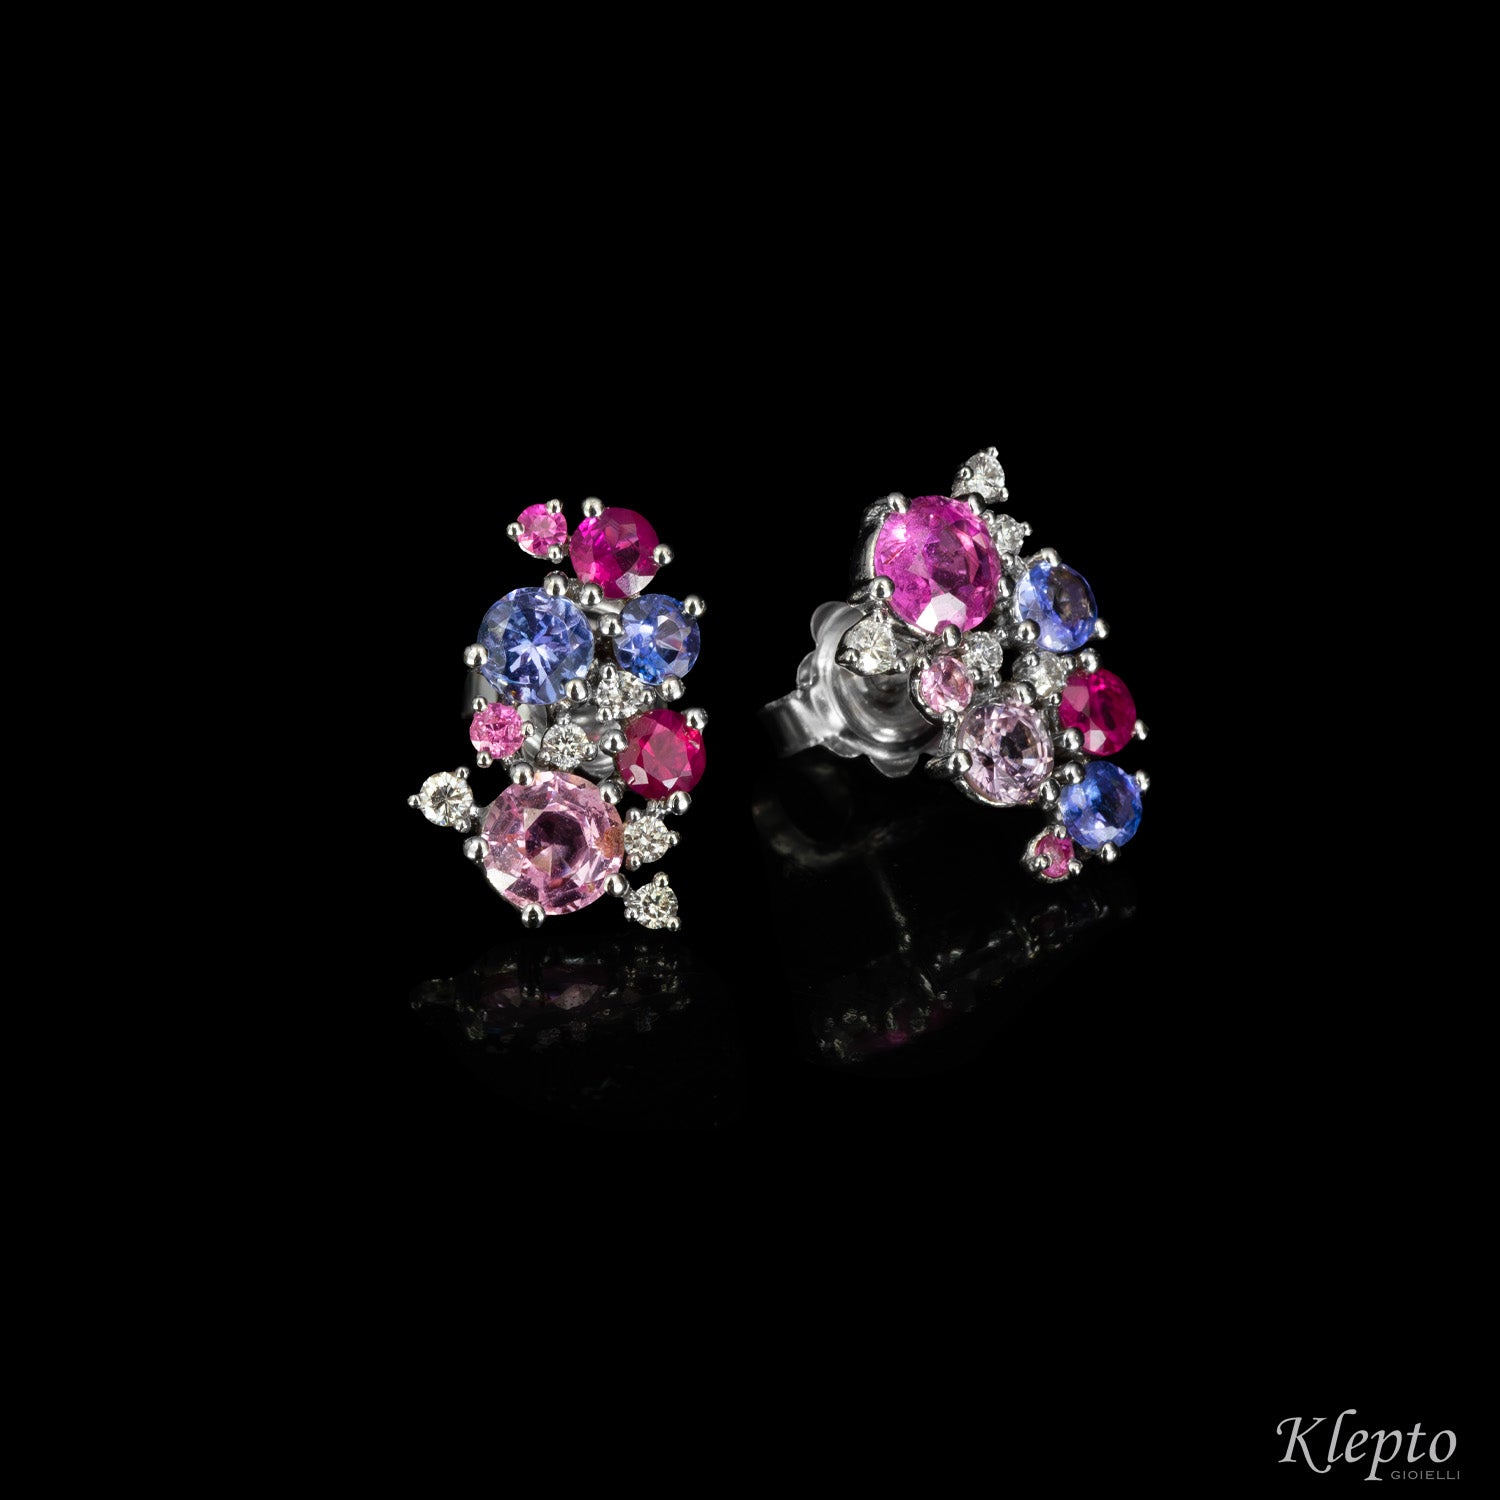 White gold lobe earrings with Sapphires, Rubies, Tanzanites and Diamonds